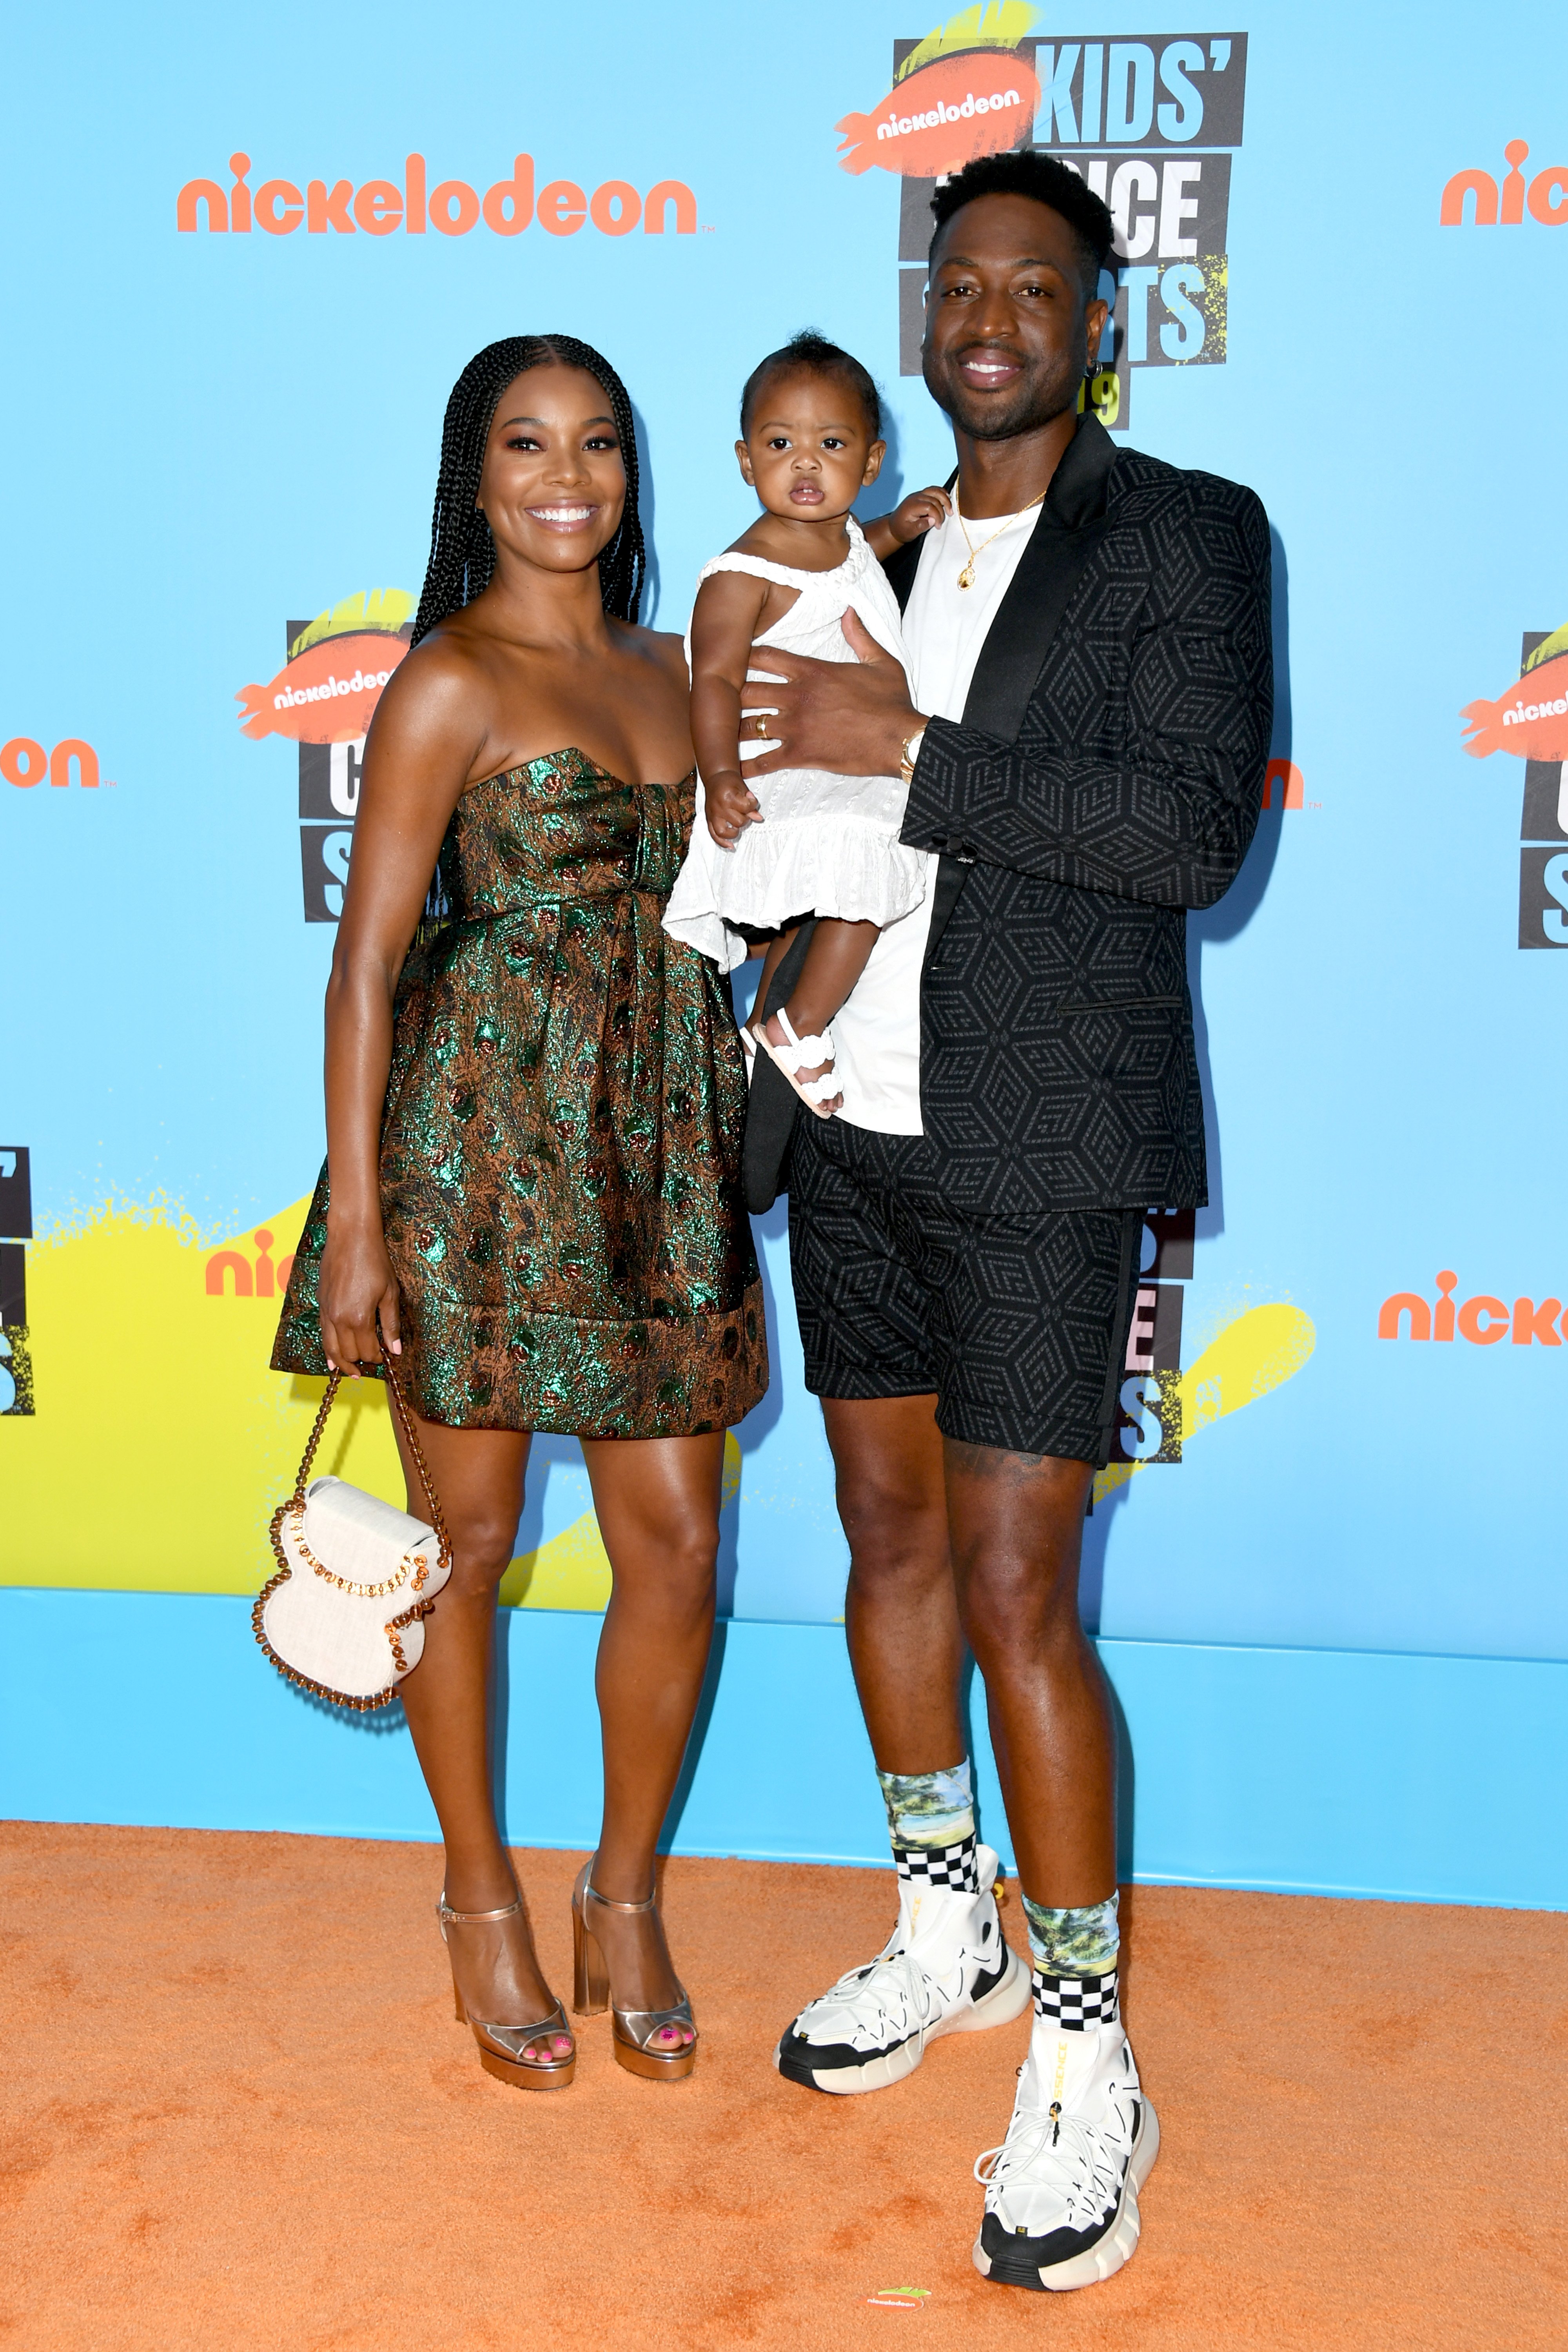 Gabrielle Union and her husband Dwyane Wade hold their daughter Kaavia James while attending the Nickelodeon Kids' Choice Sports 2019 in Santa Monica, California on July 11, 2019 | Photo: Getty Images